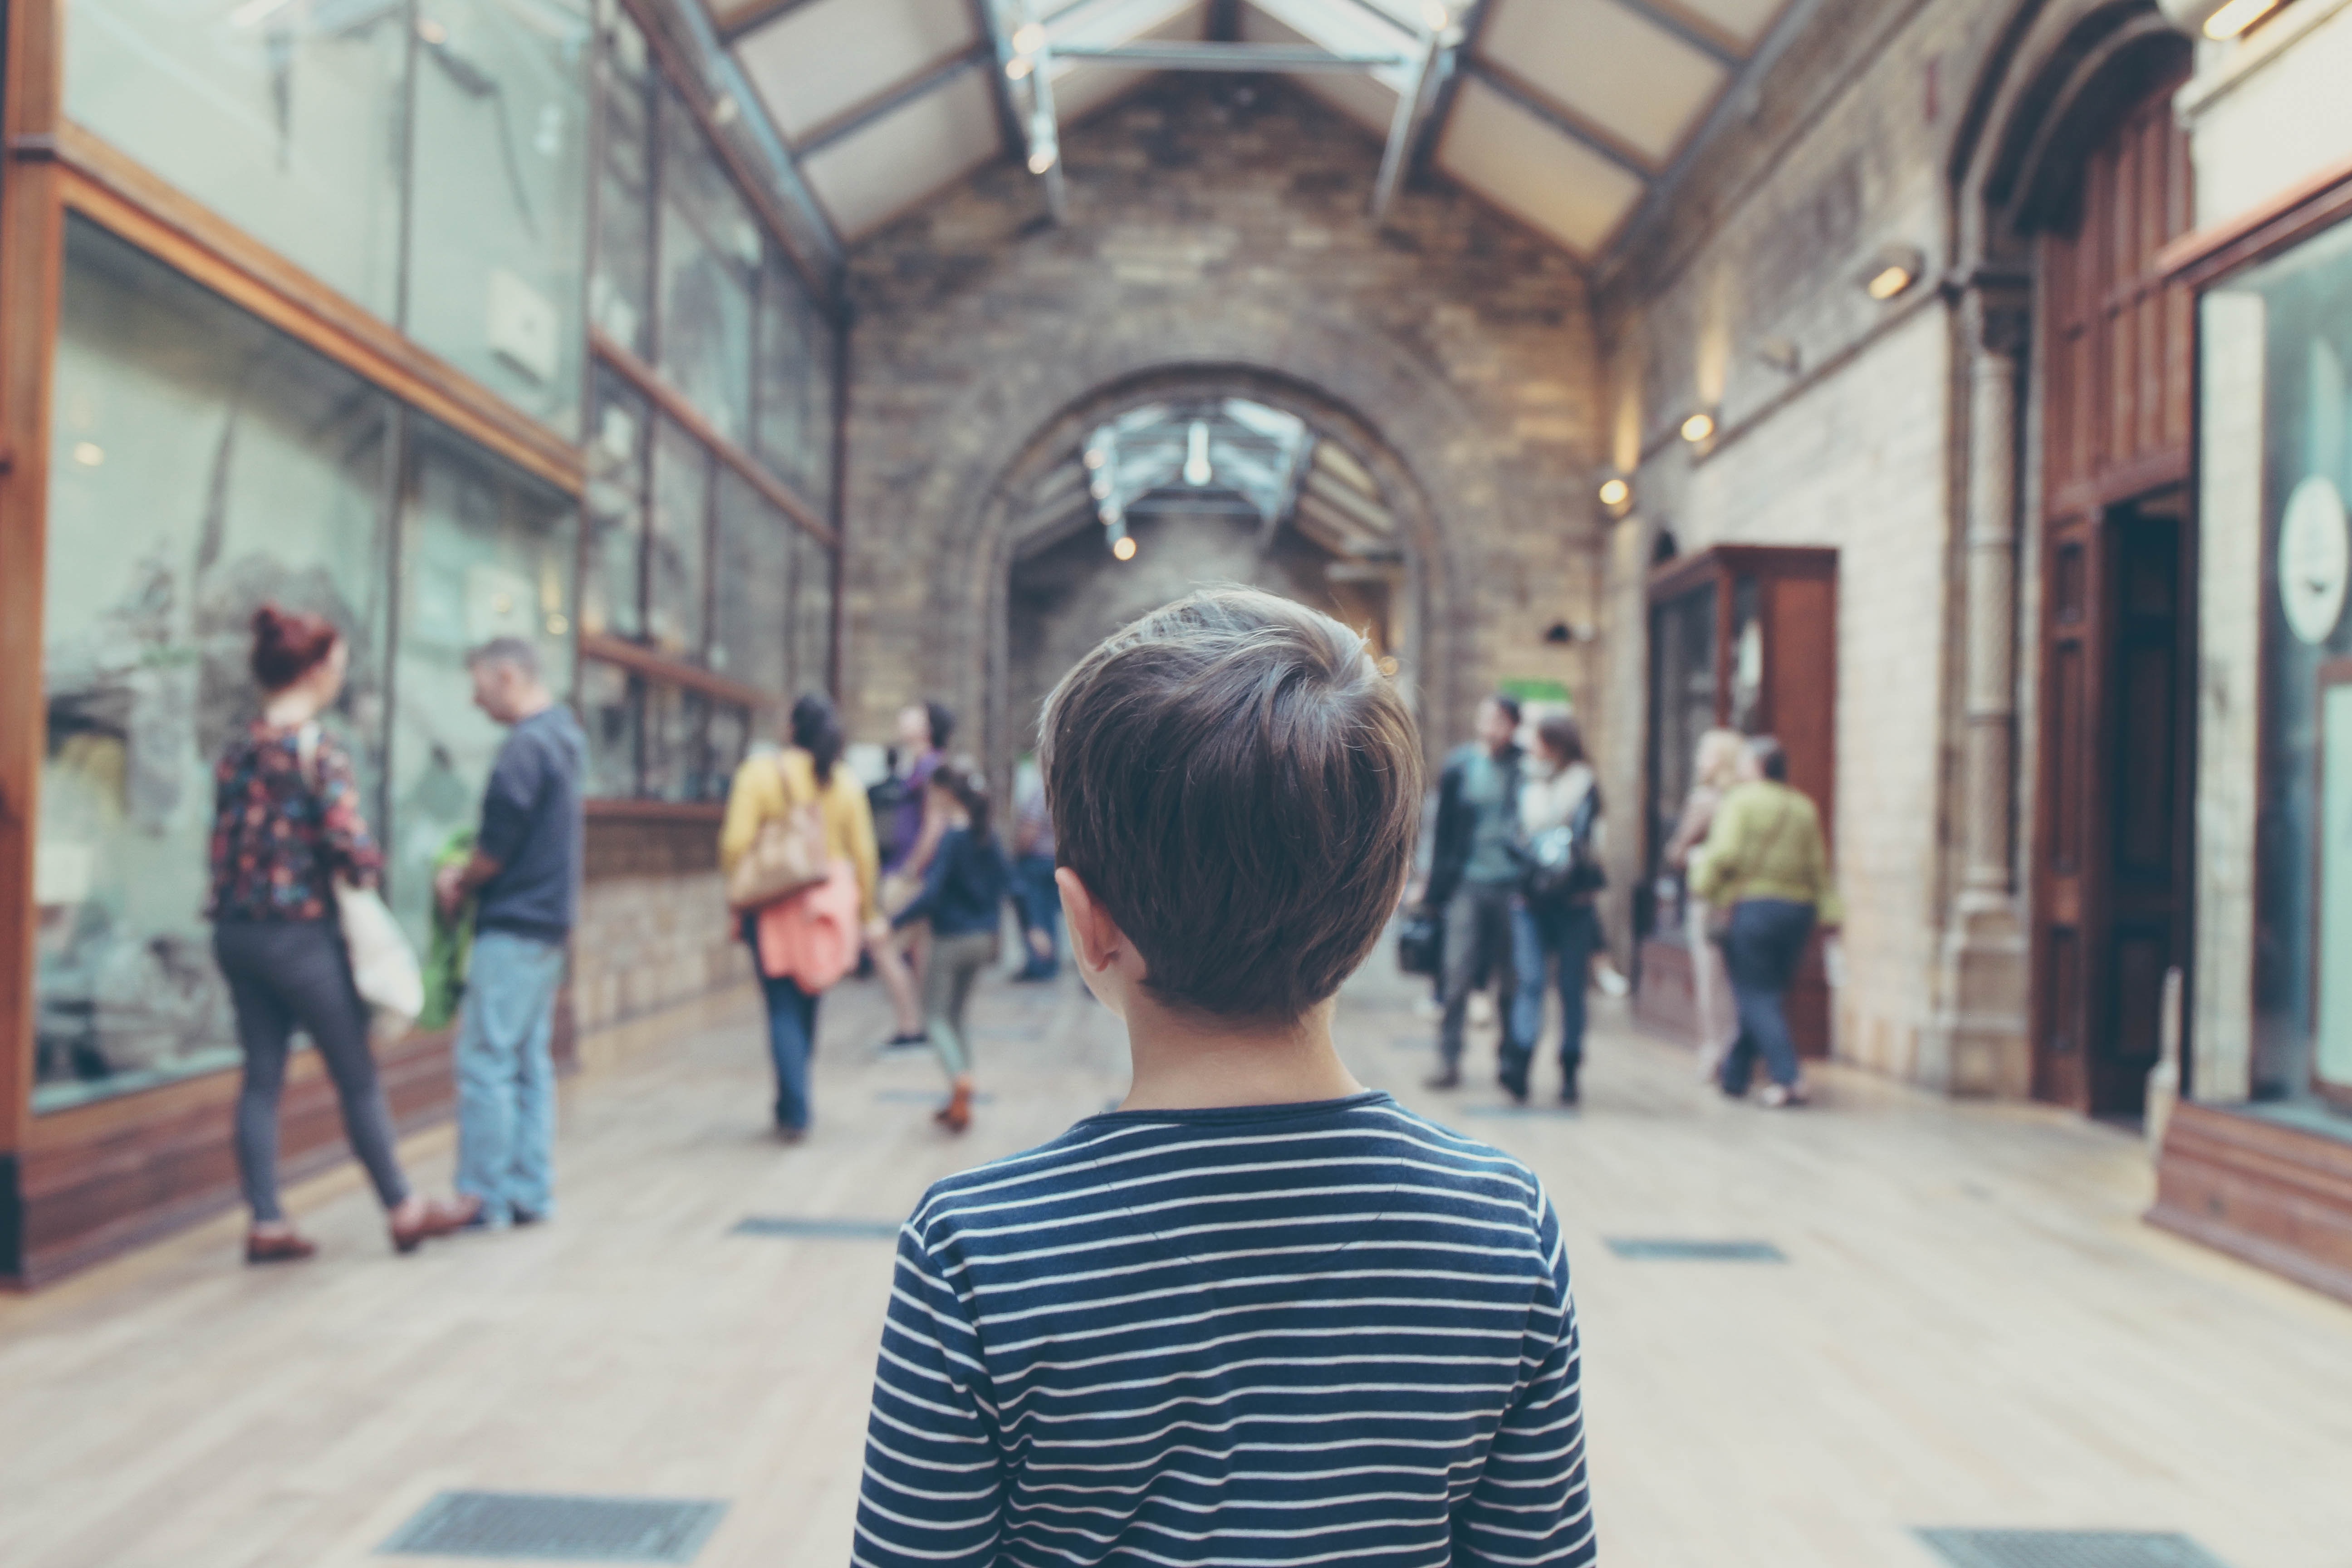 A pilot project will seek to understand ways young children engage with museums. 